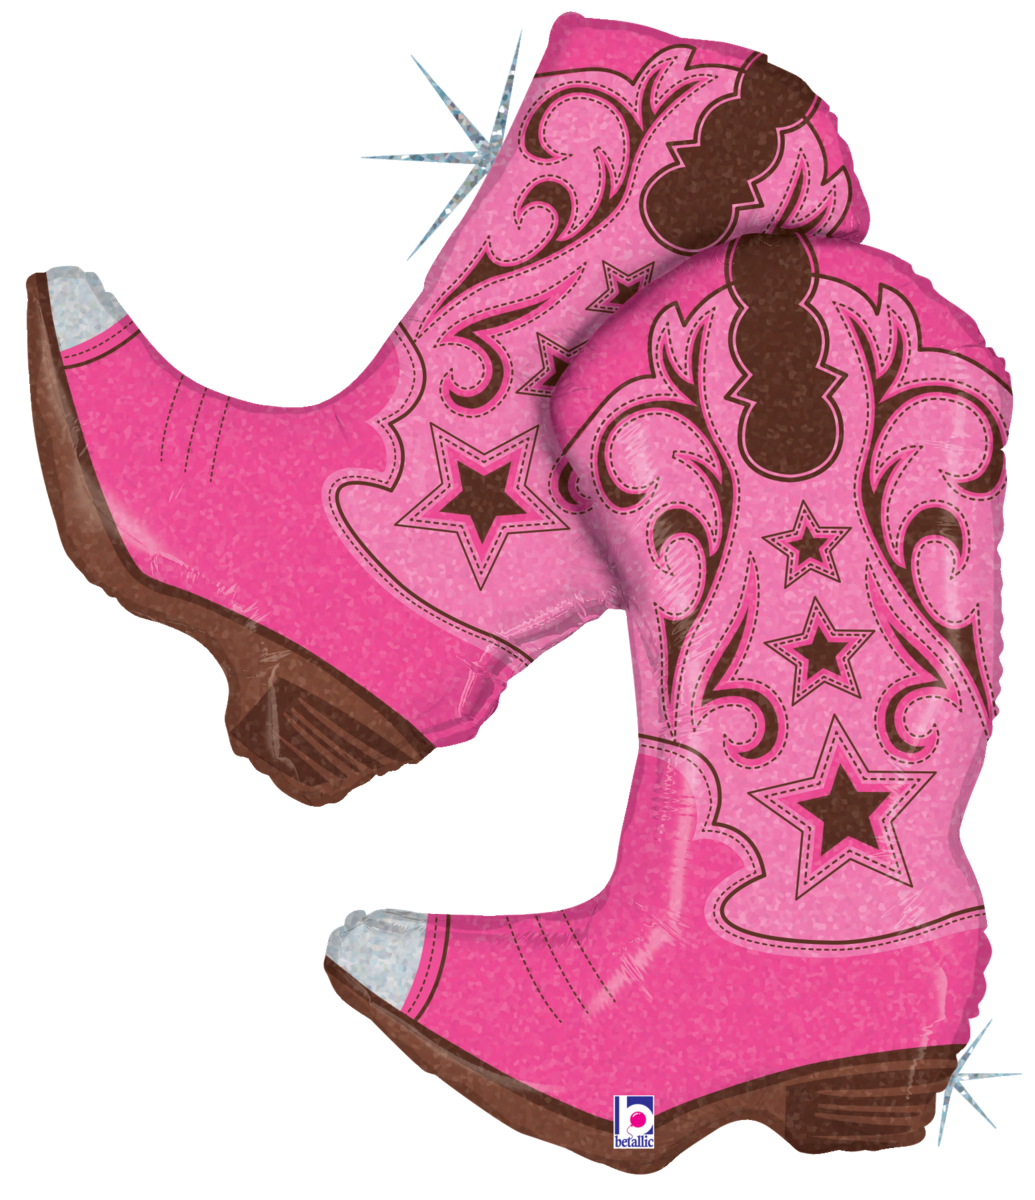 35565_PinkDancingBoots1200x1200.png